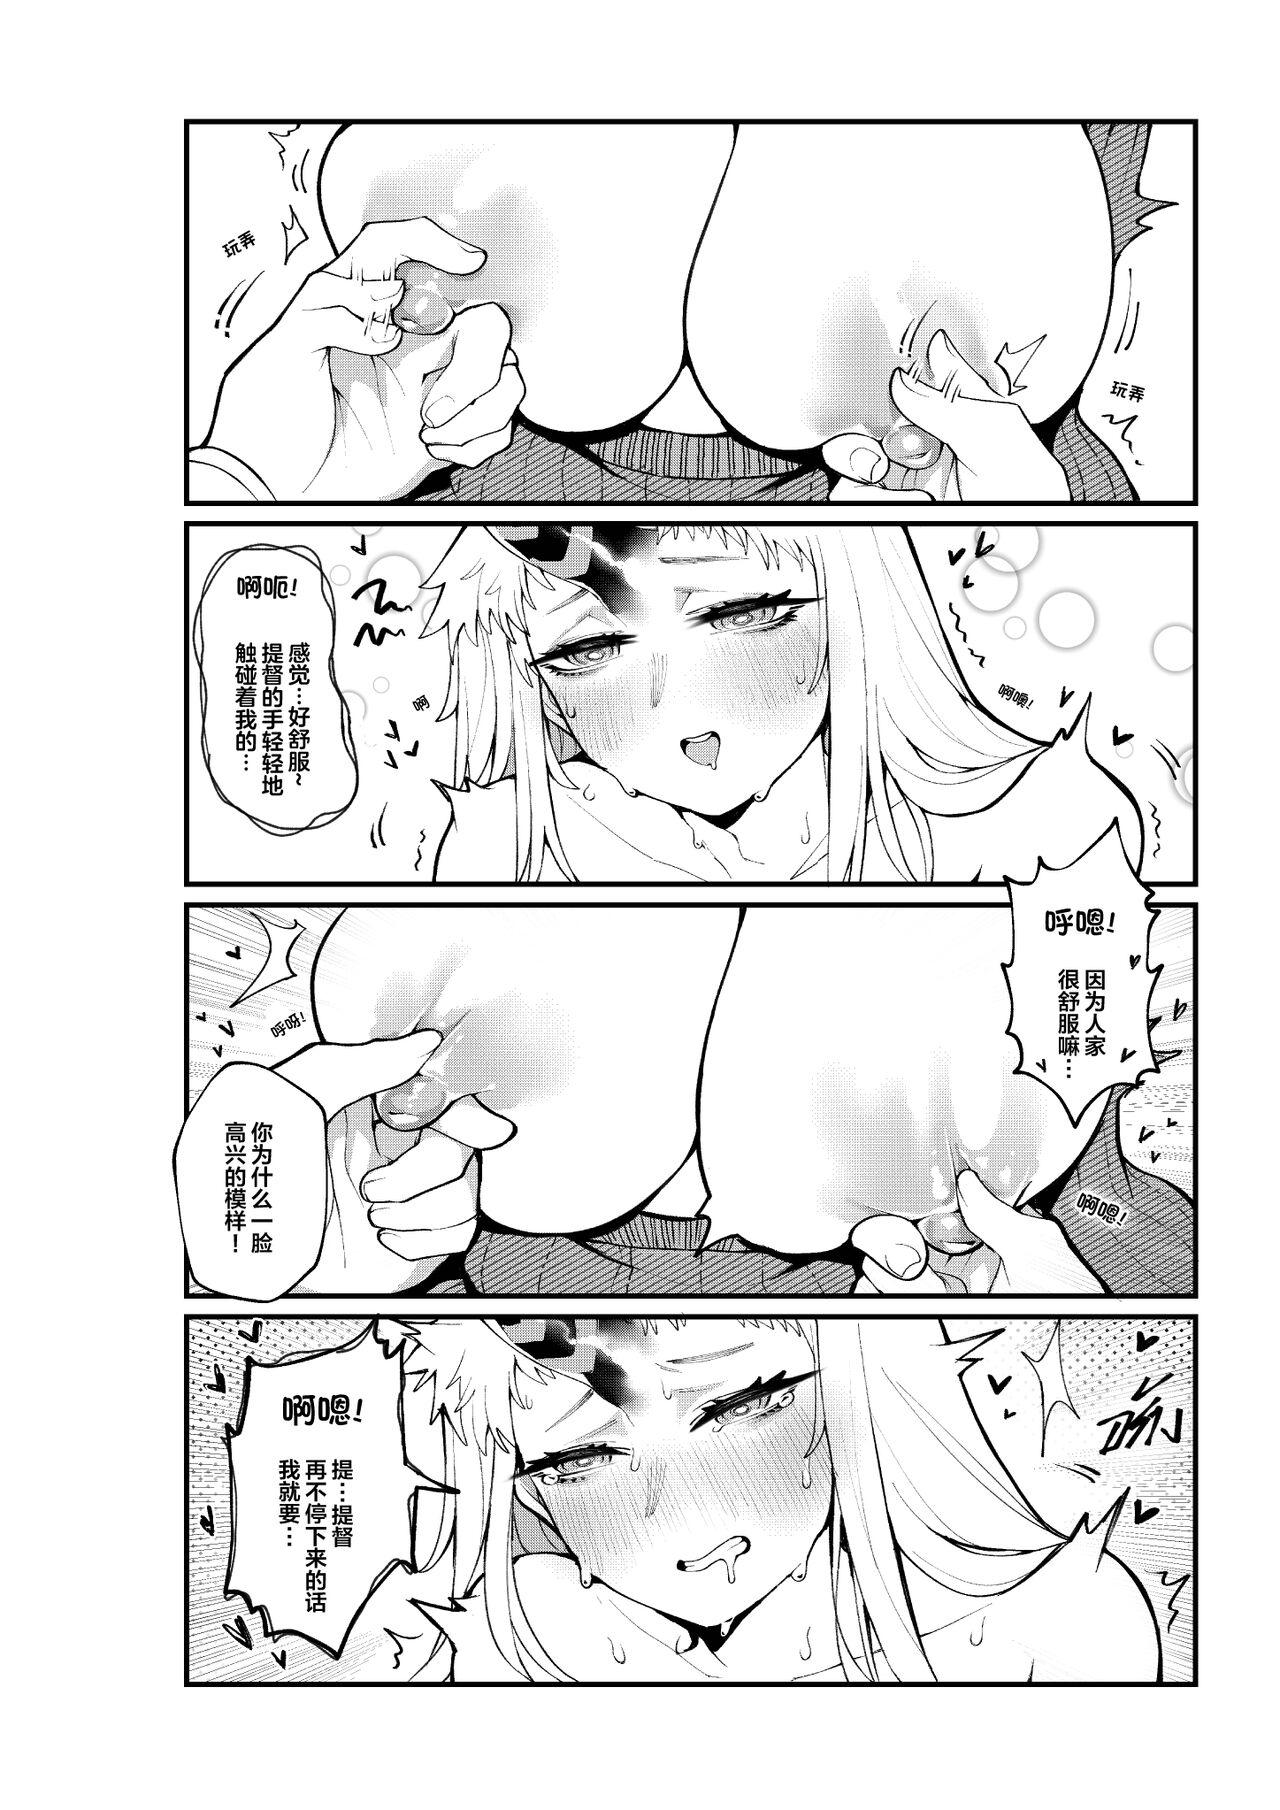 Gay Dudes Always SIMP my darling, Pale Harbour | 我所痴爱着的，港湾栖姬 - Kantai collection Nasty - Page 7